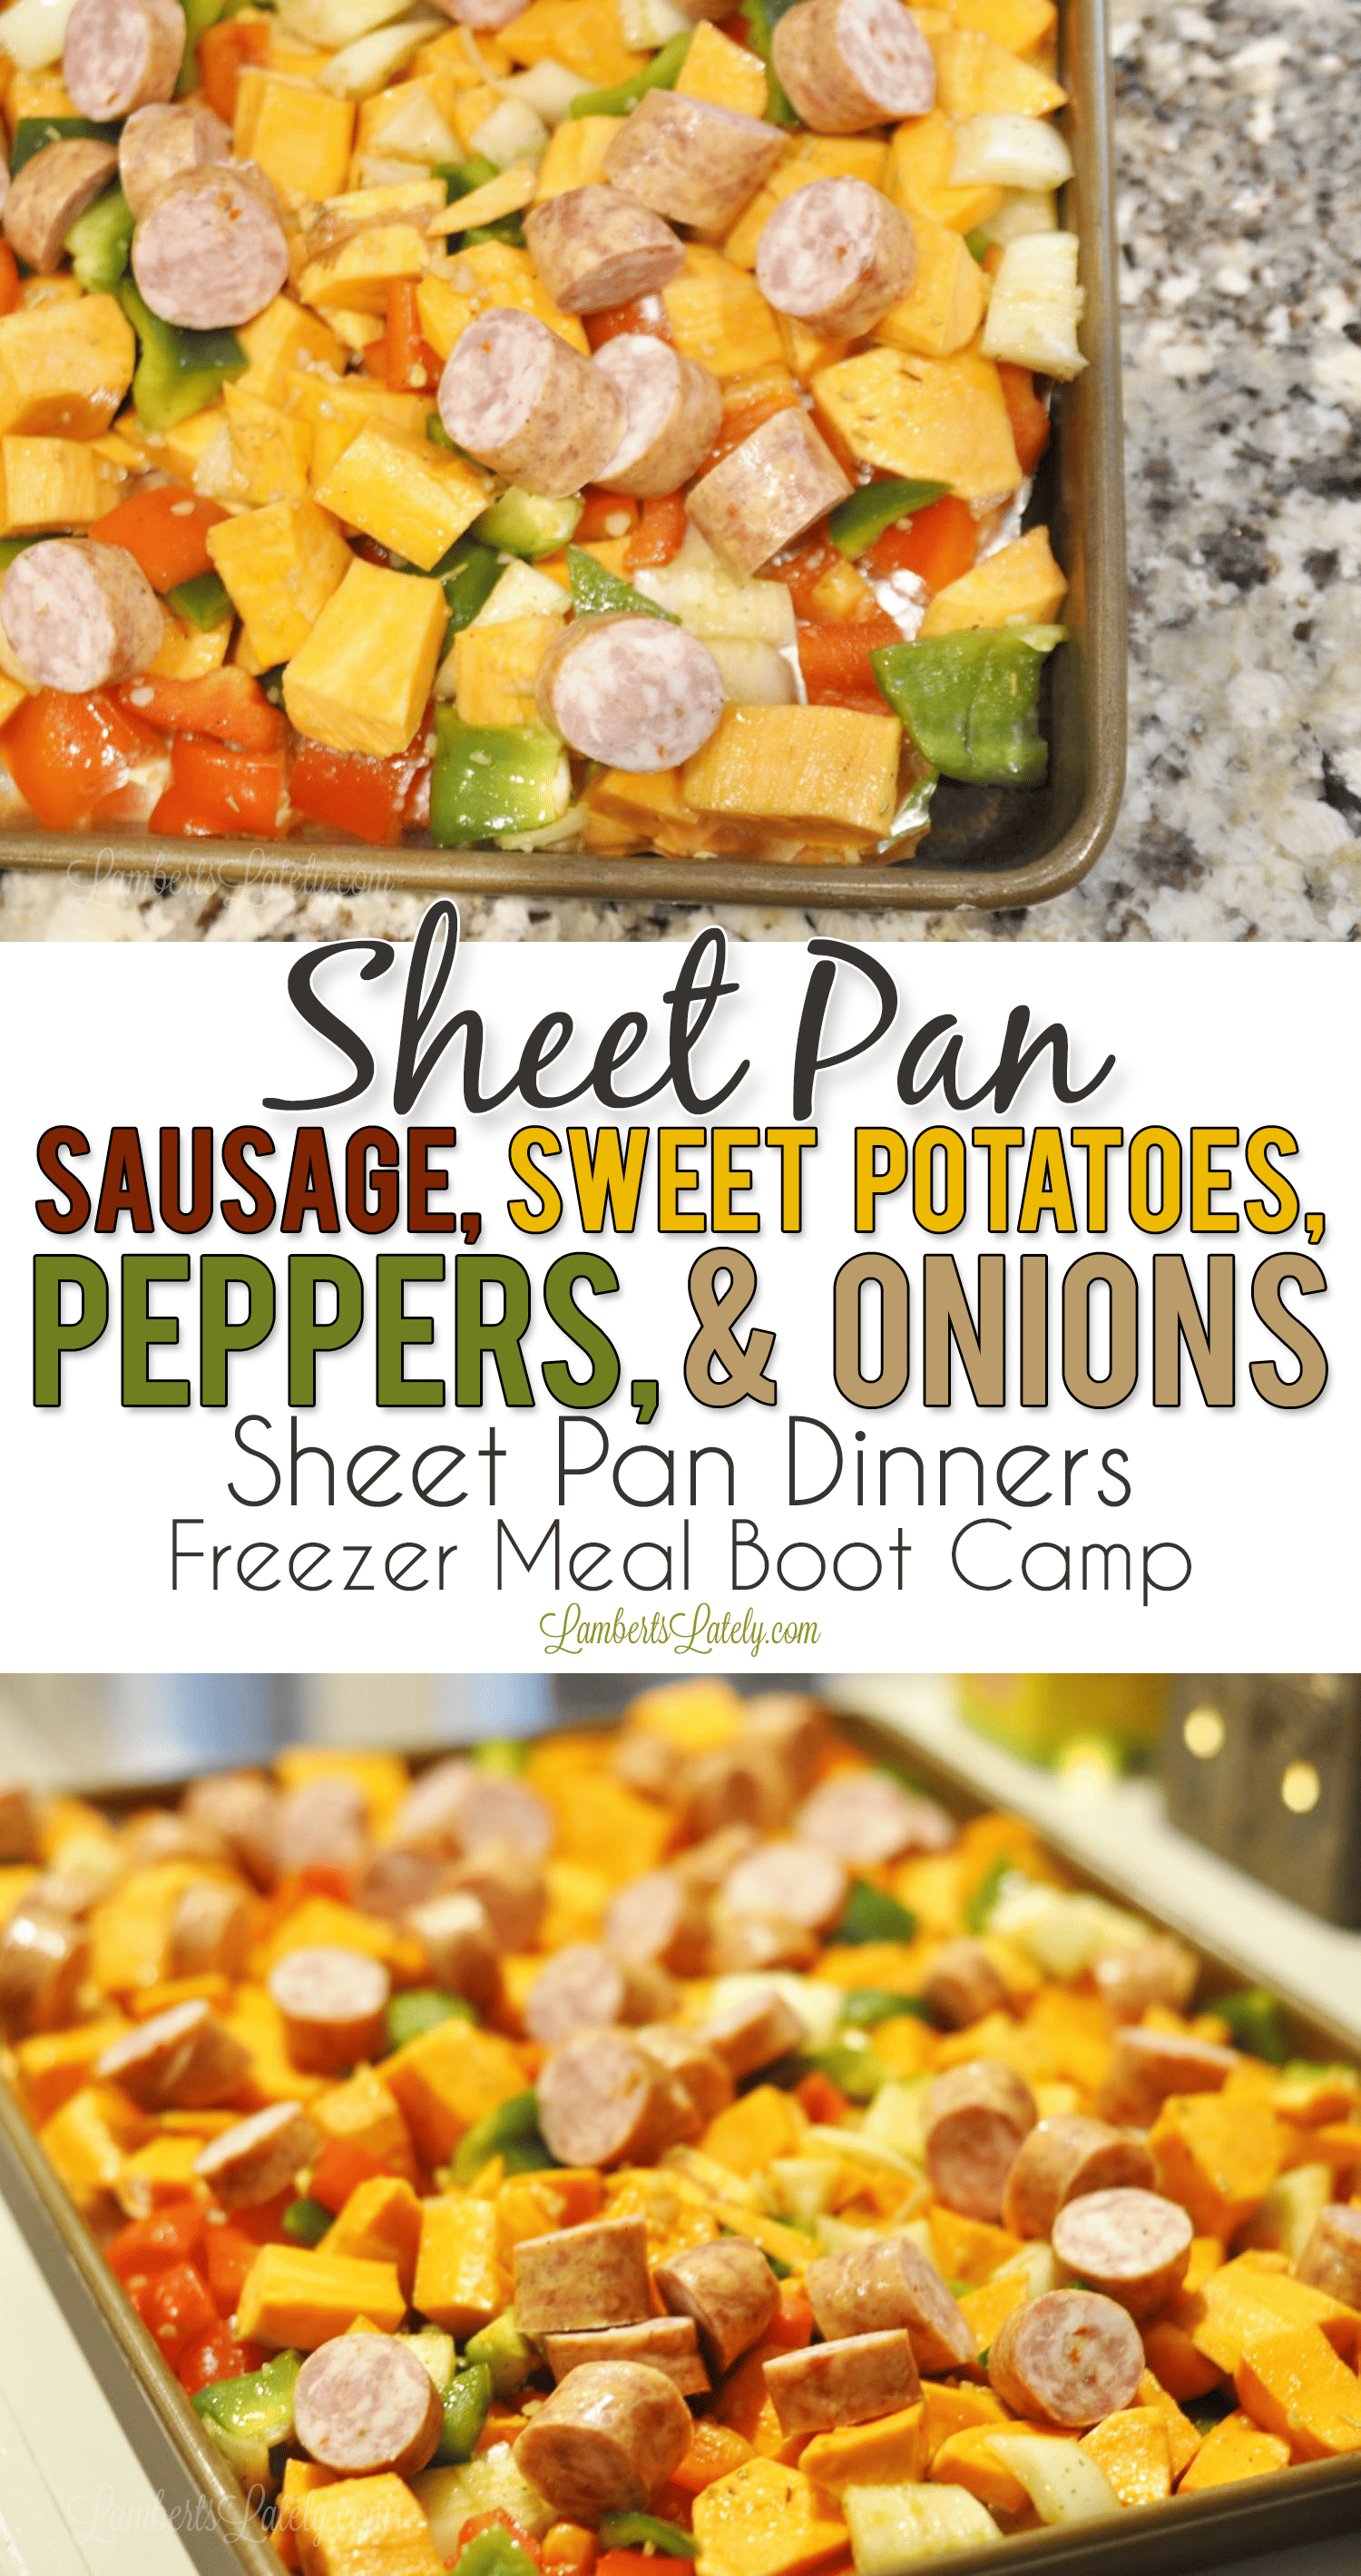 Sheet Pan Sausage, Sweet Potatoes, Peppers, & Onions is a colorful, healthy weeknight meal that's full of vegetables and flavor. Sheet pan dinners are such easy meals - they make for easy weeknight freezer meals too!